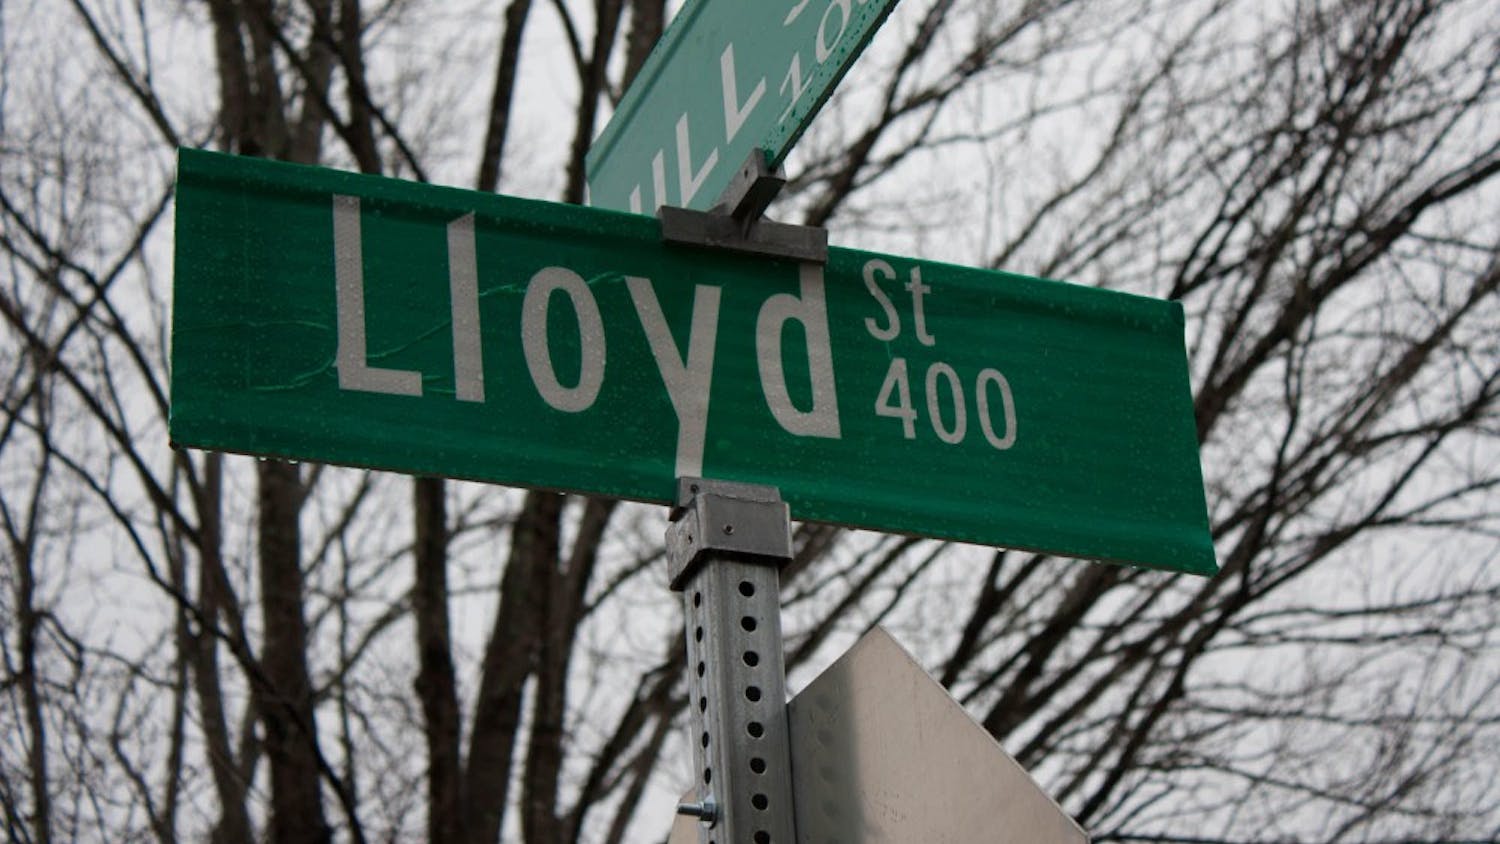 The Lloyd-Broad neighborhood is a historic neighborhood in Carrboro, NC whose residents are facing issues of student gentrification.